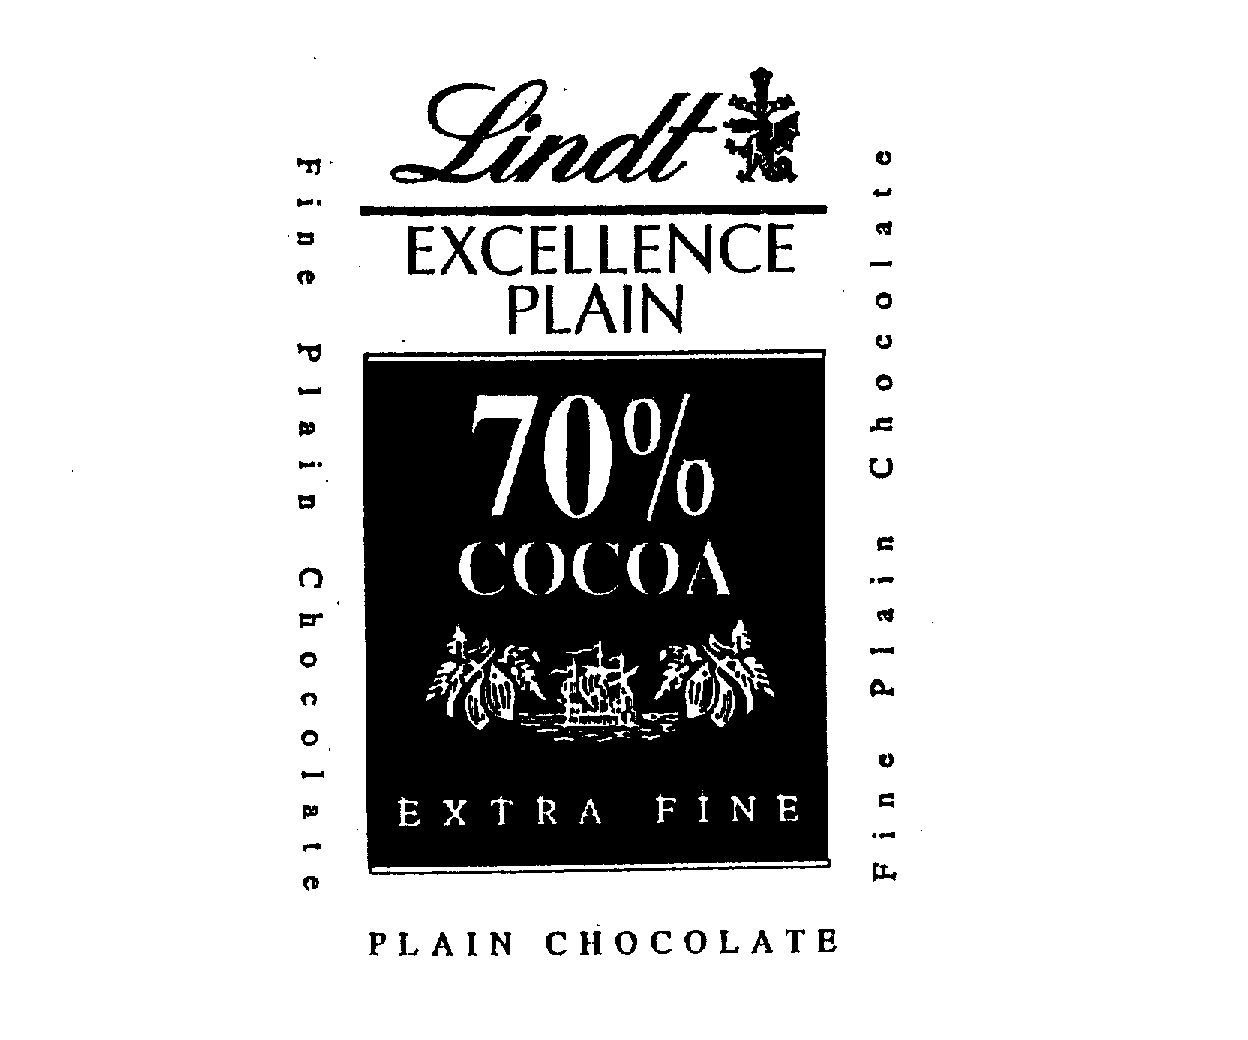  LINDT EXCELLENCE PLAIN 70% COCOA EXTRA FINE FINE PLAIN CHOCOLATE PLAIN CHOCOLATE